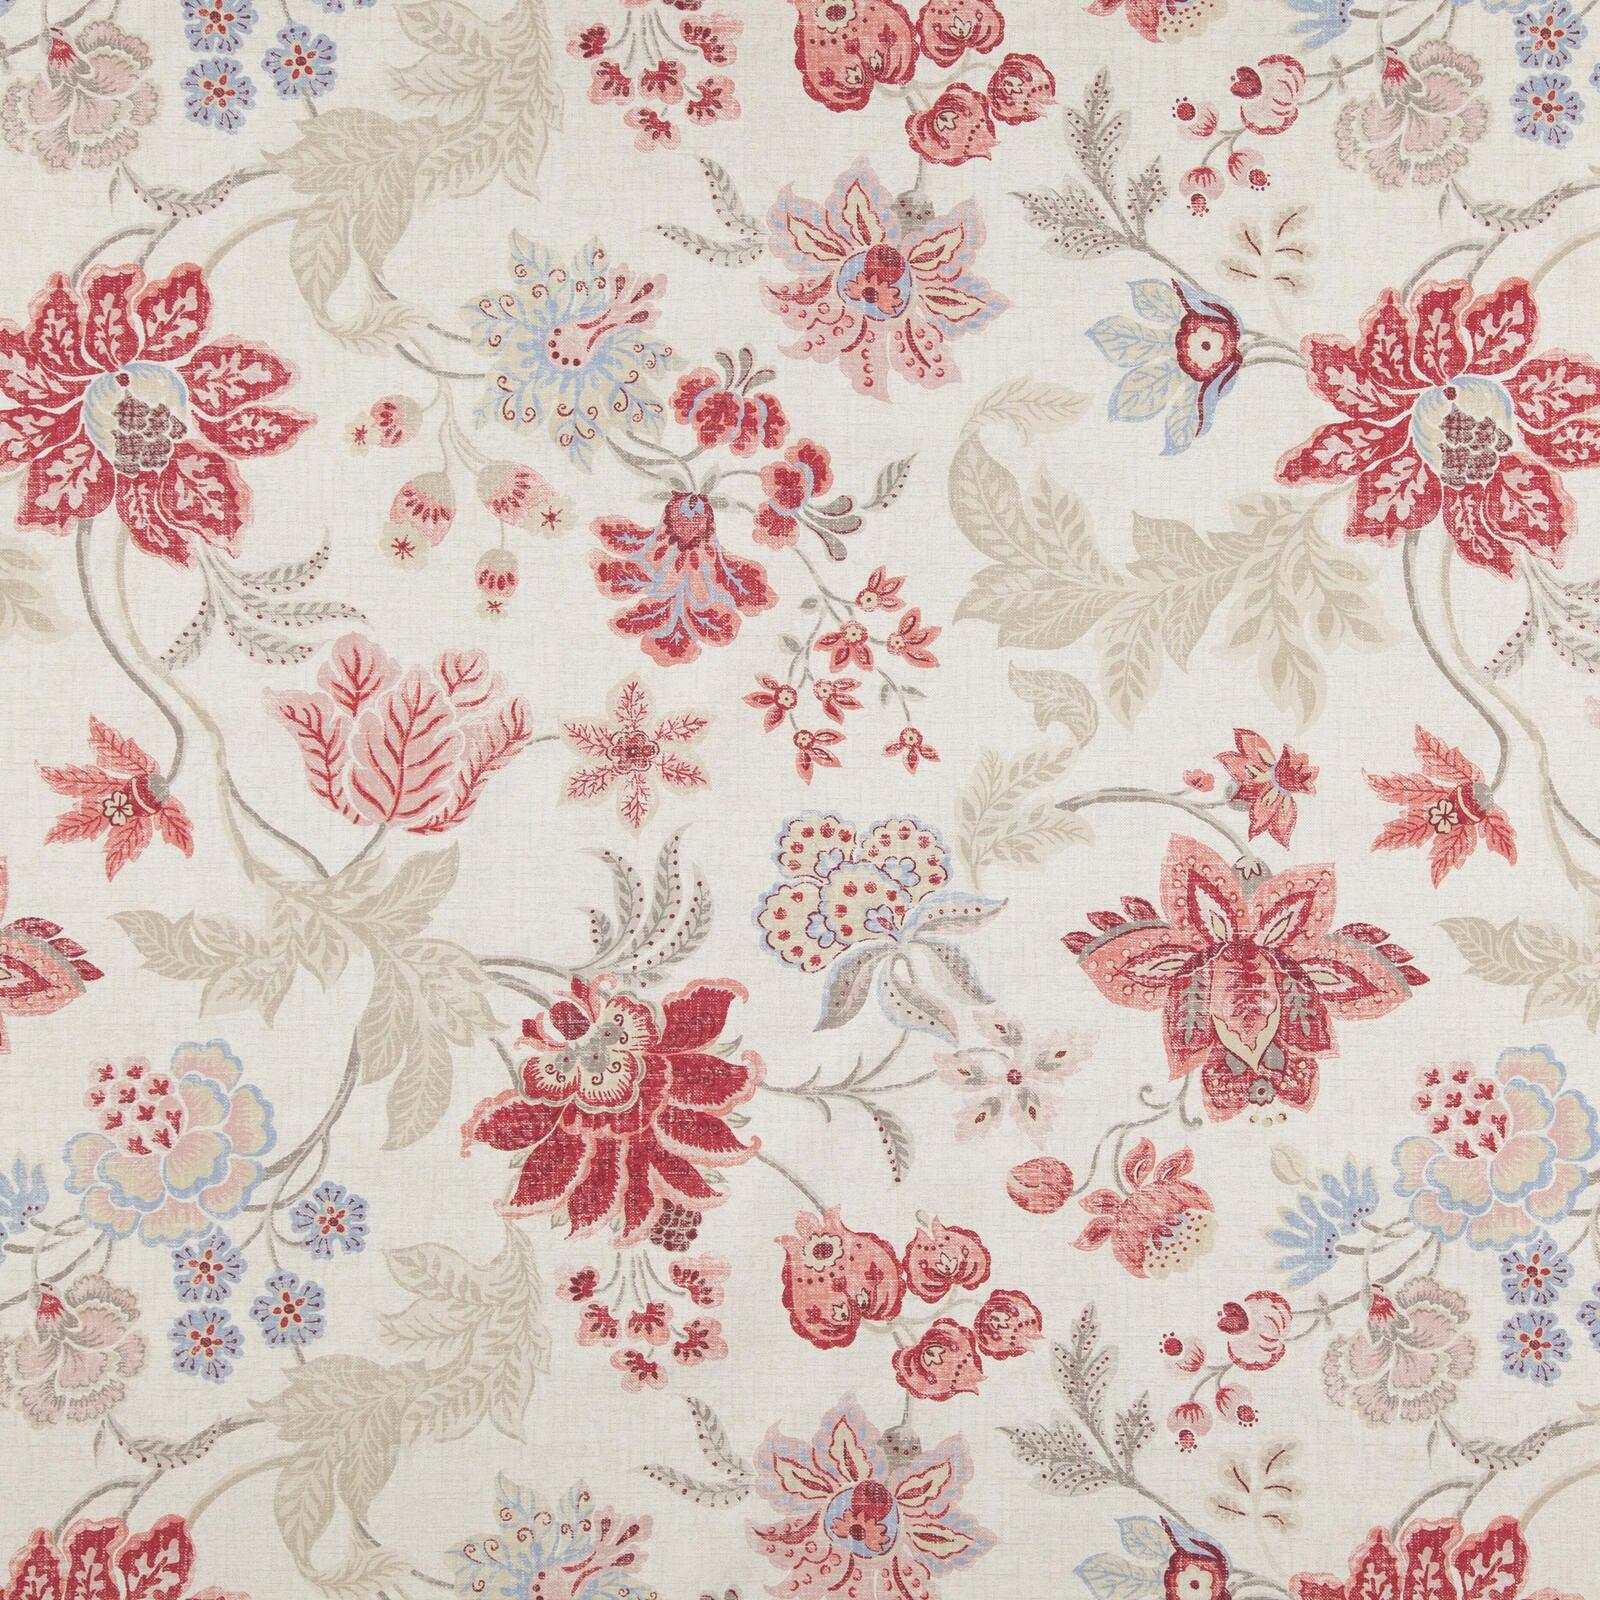 Cotton floral upholstery drapery home decor fabric red pink